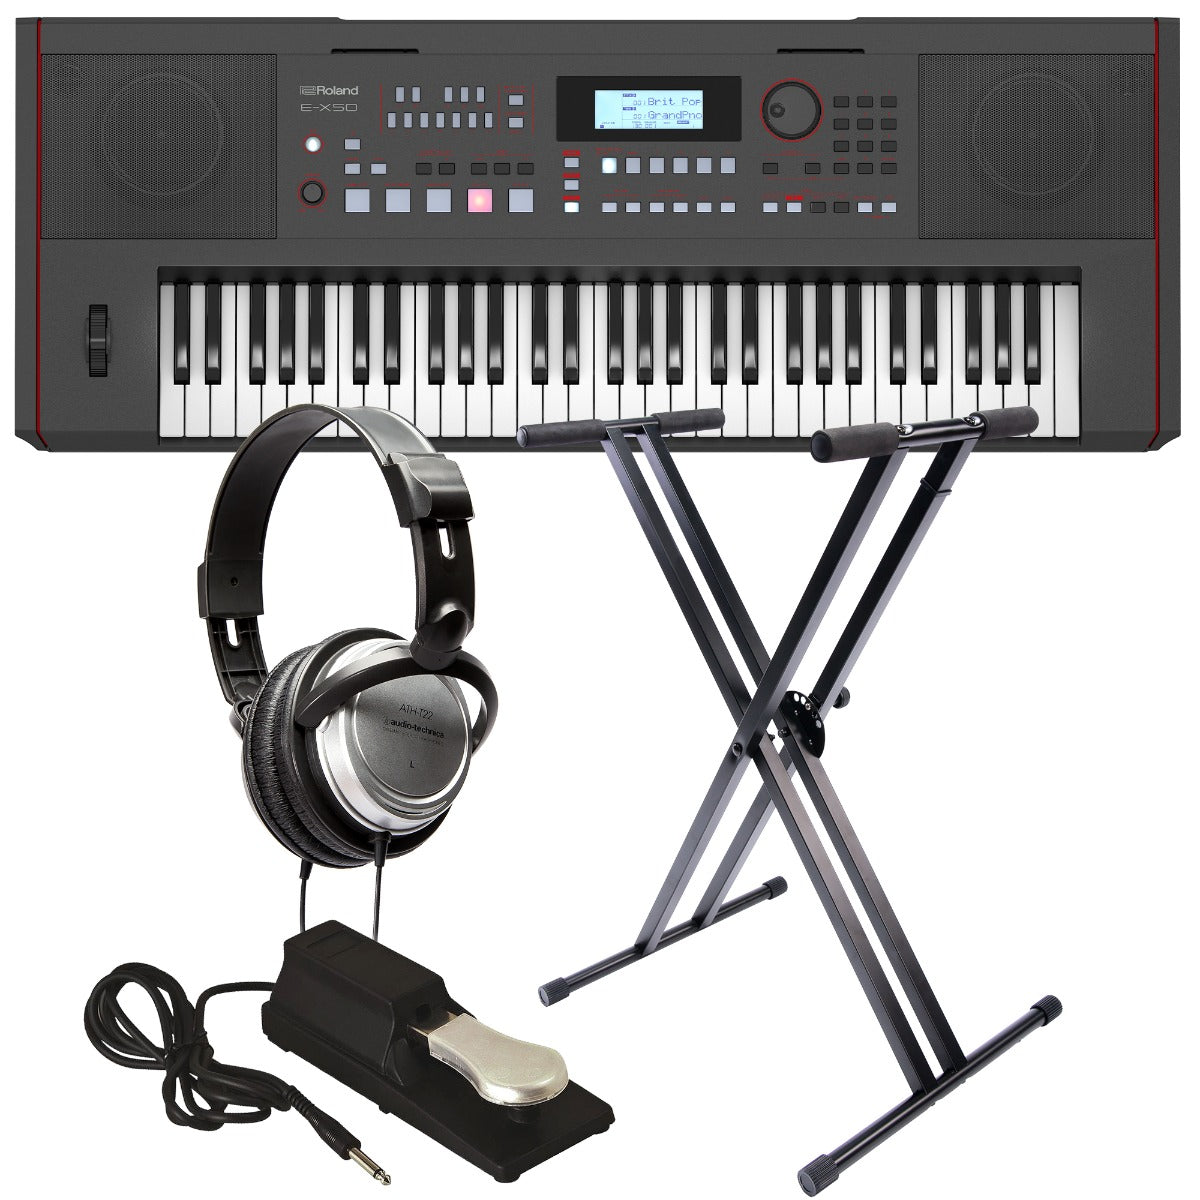 Collage of the Roland E-X50 Arranger Keyboard KEY ESSENTIALS BUNDLE showing included components